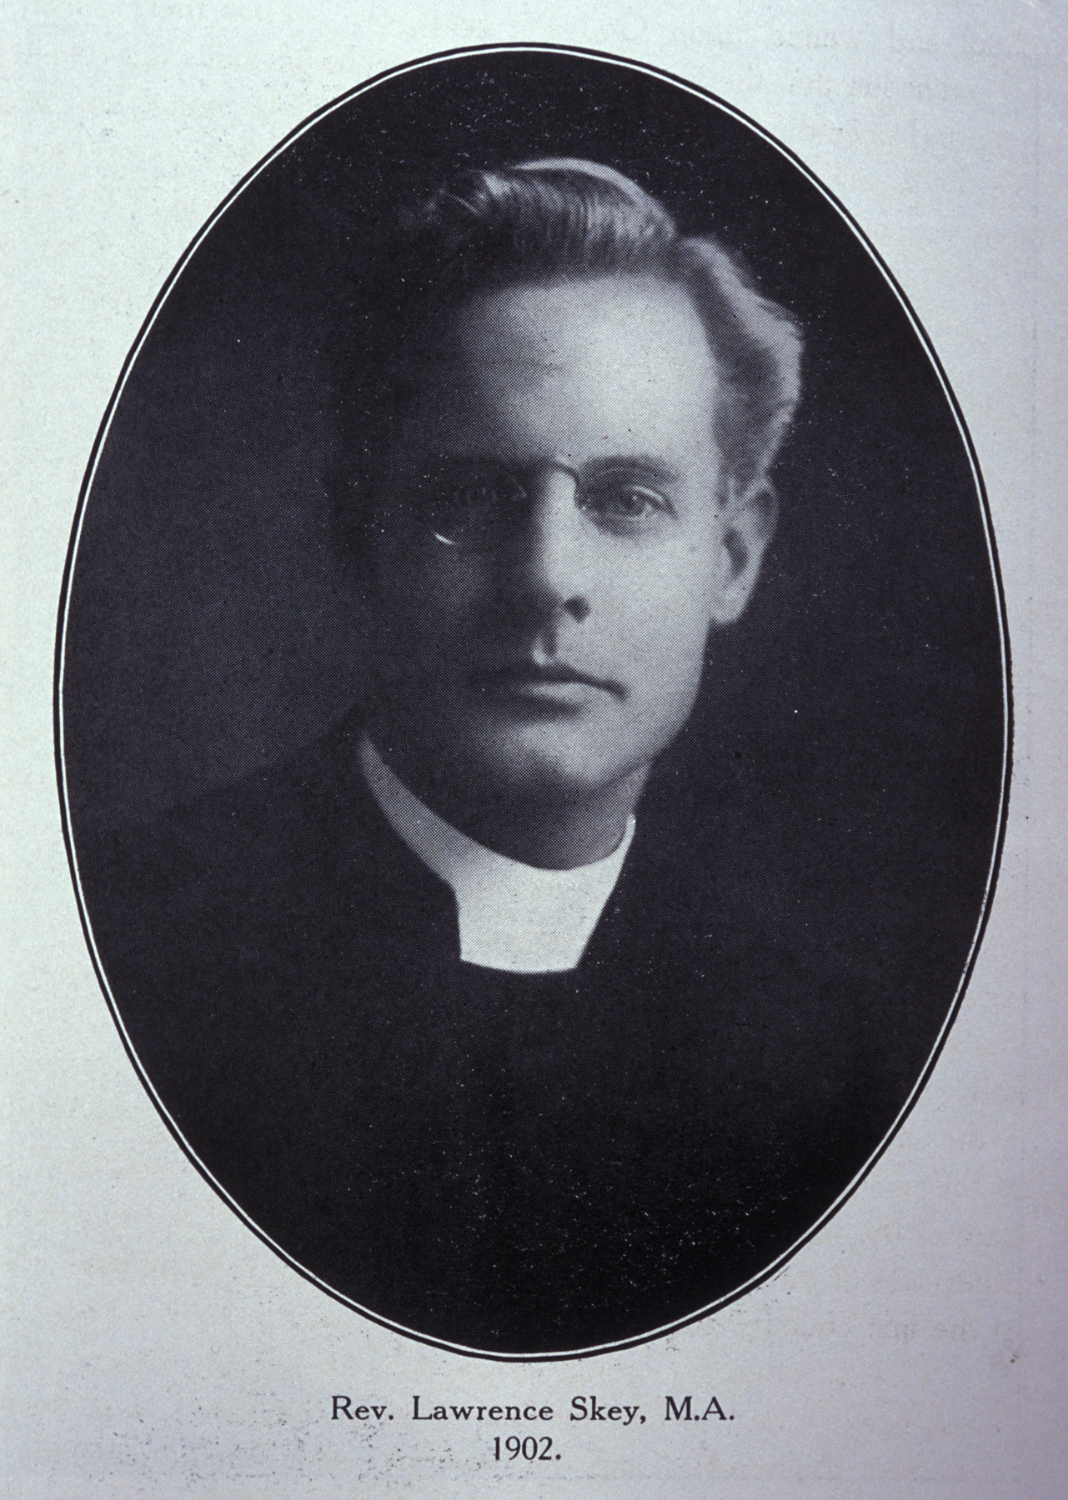 Photographic portrait of a man in clerical robes.